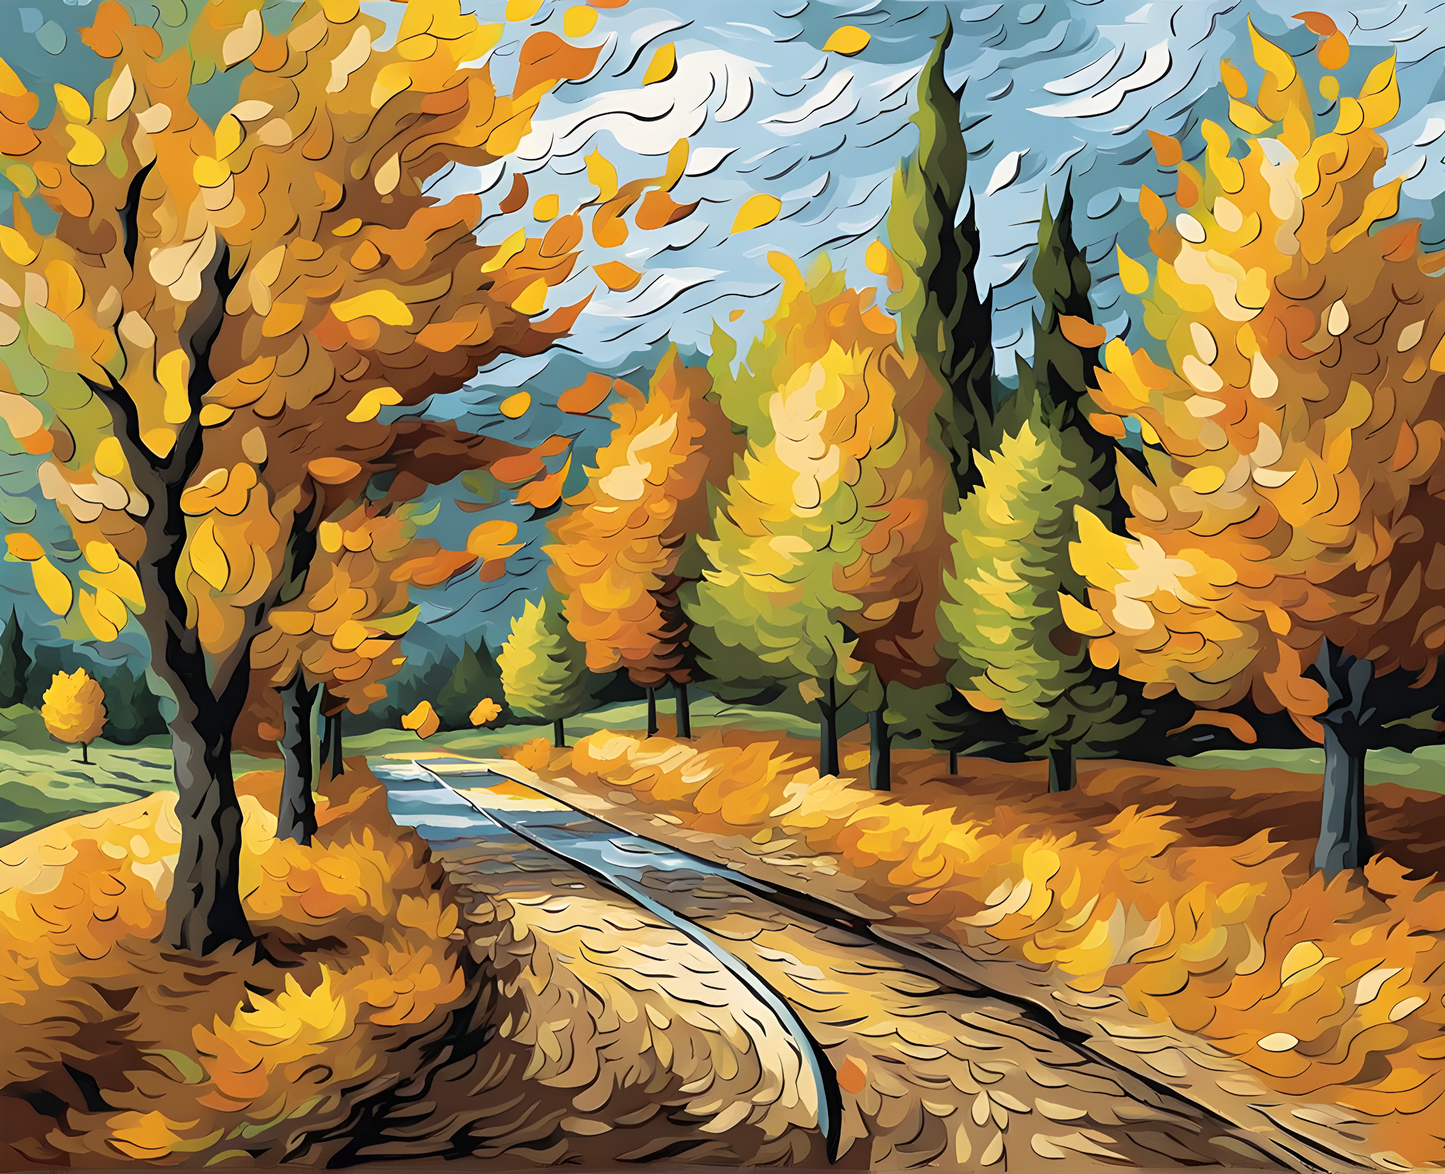 FALL BREEZE - Van-Go Paint-By-Number Kit